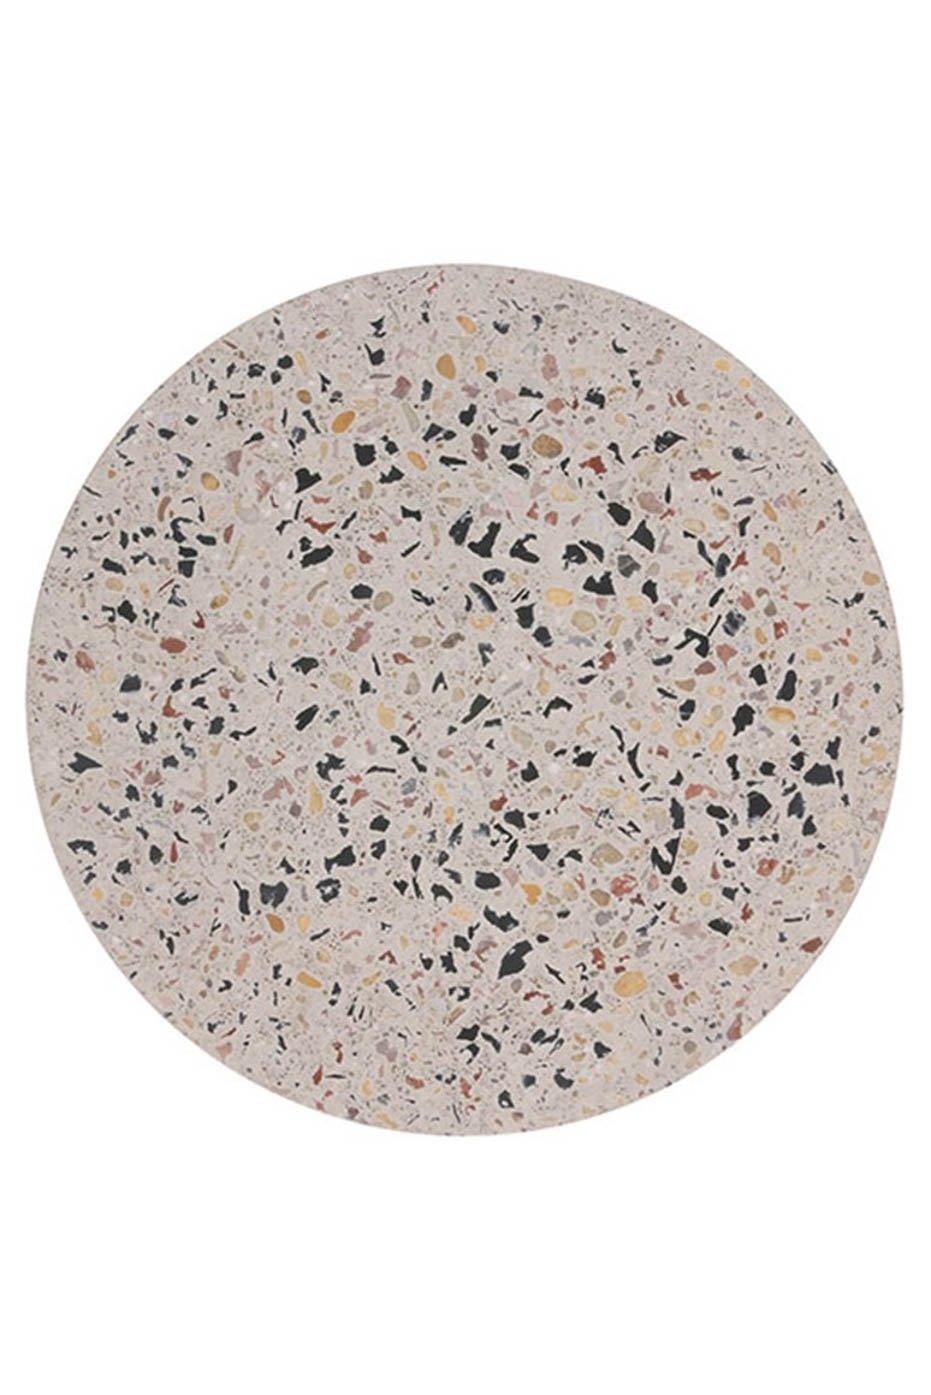 HK Living Terrazzo Serving Tray Large